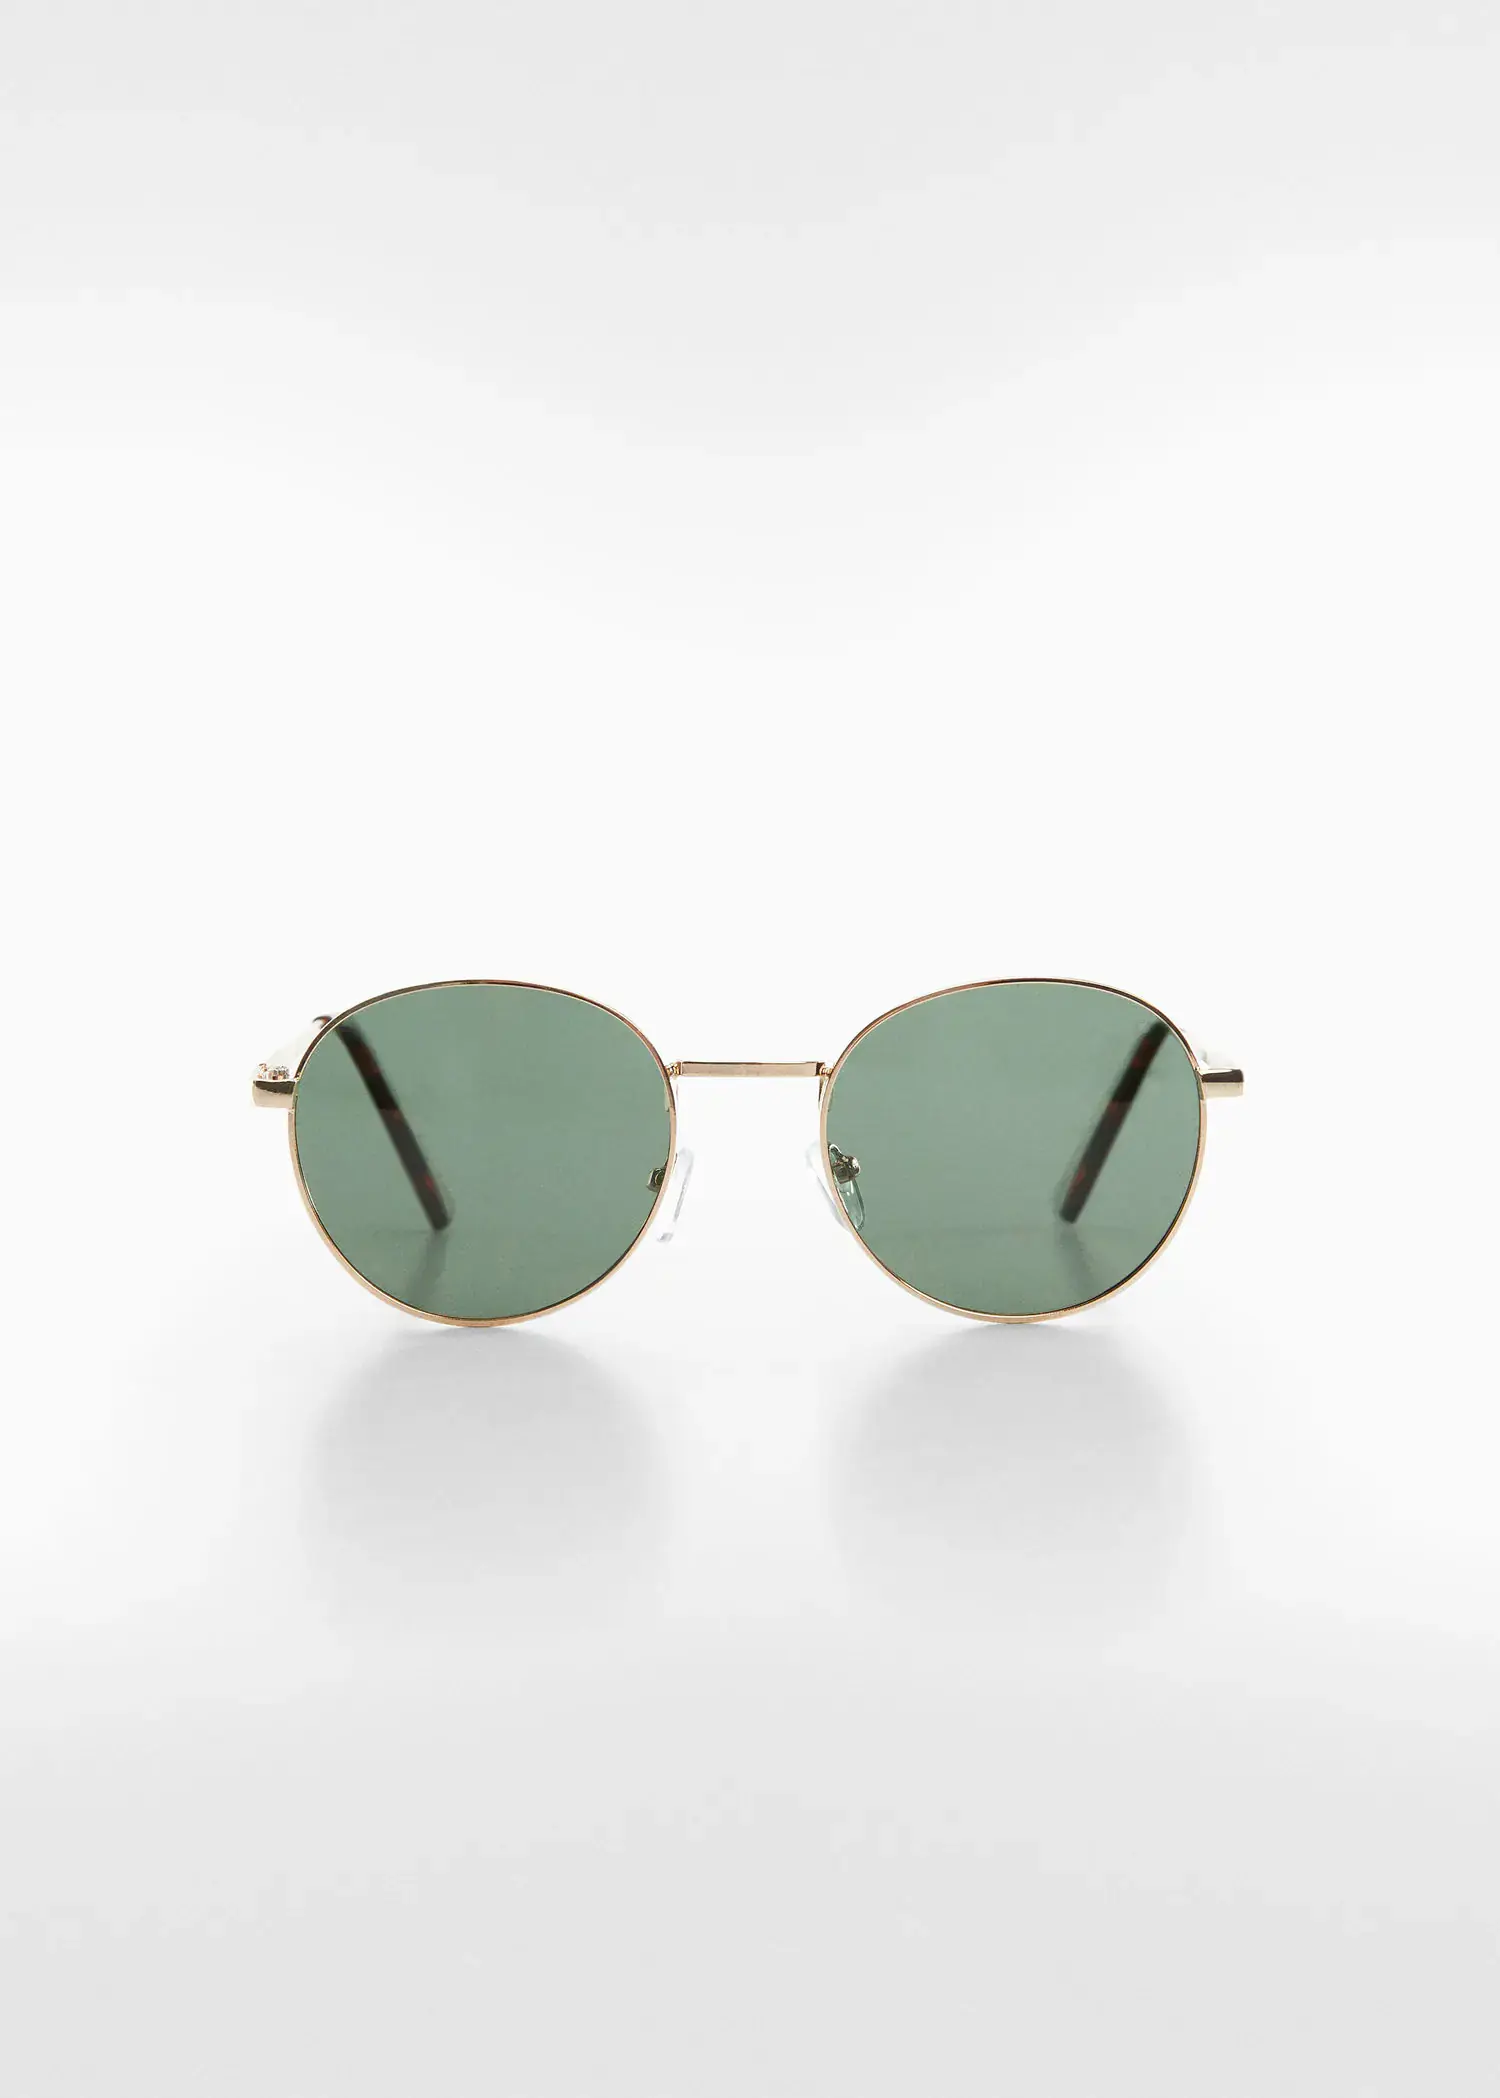 Mango Polarised sunglasses. a pair of green sunglasses sitting on top of a white table. 